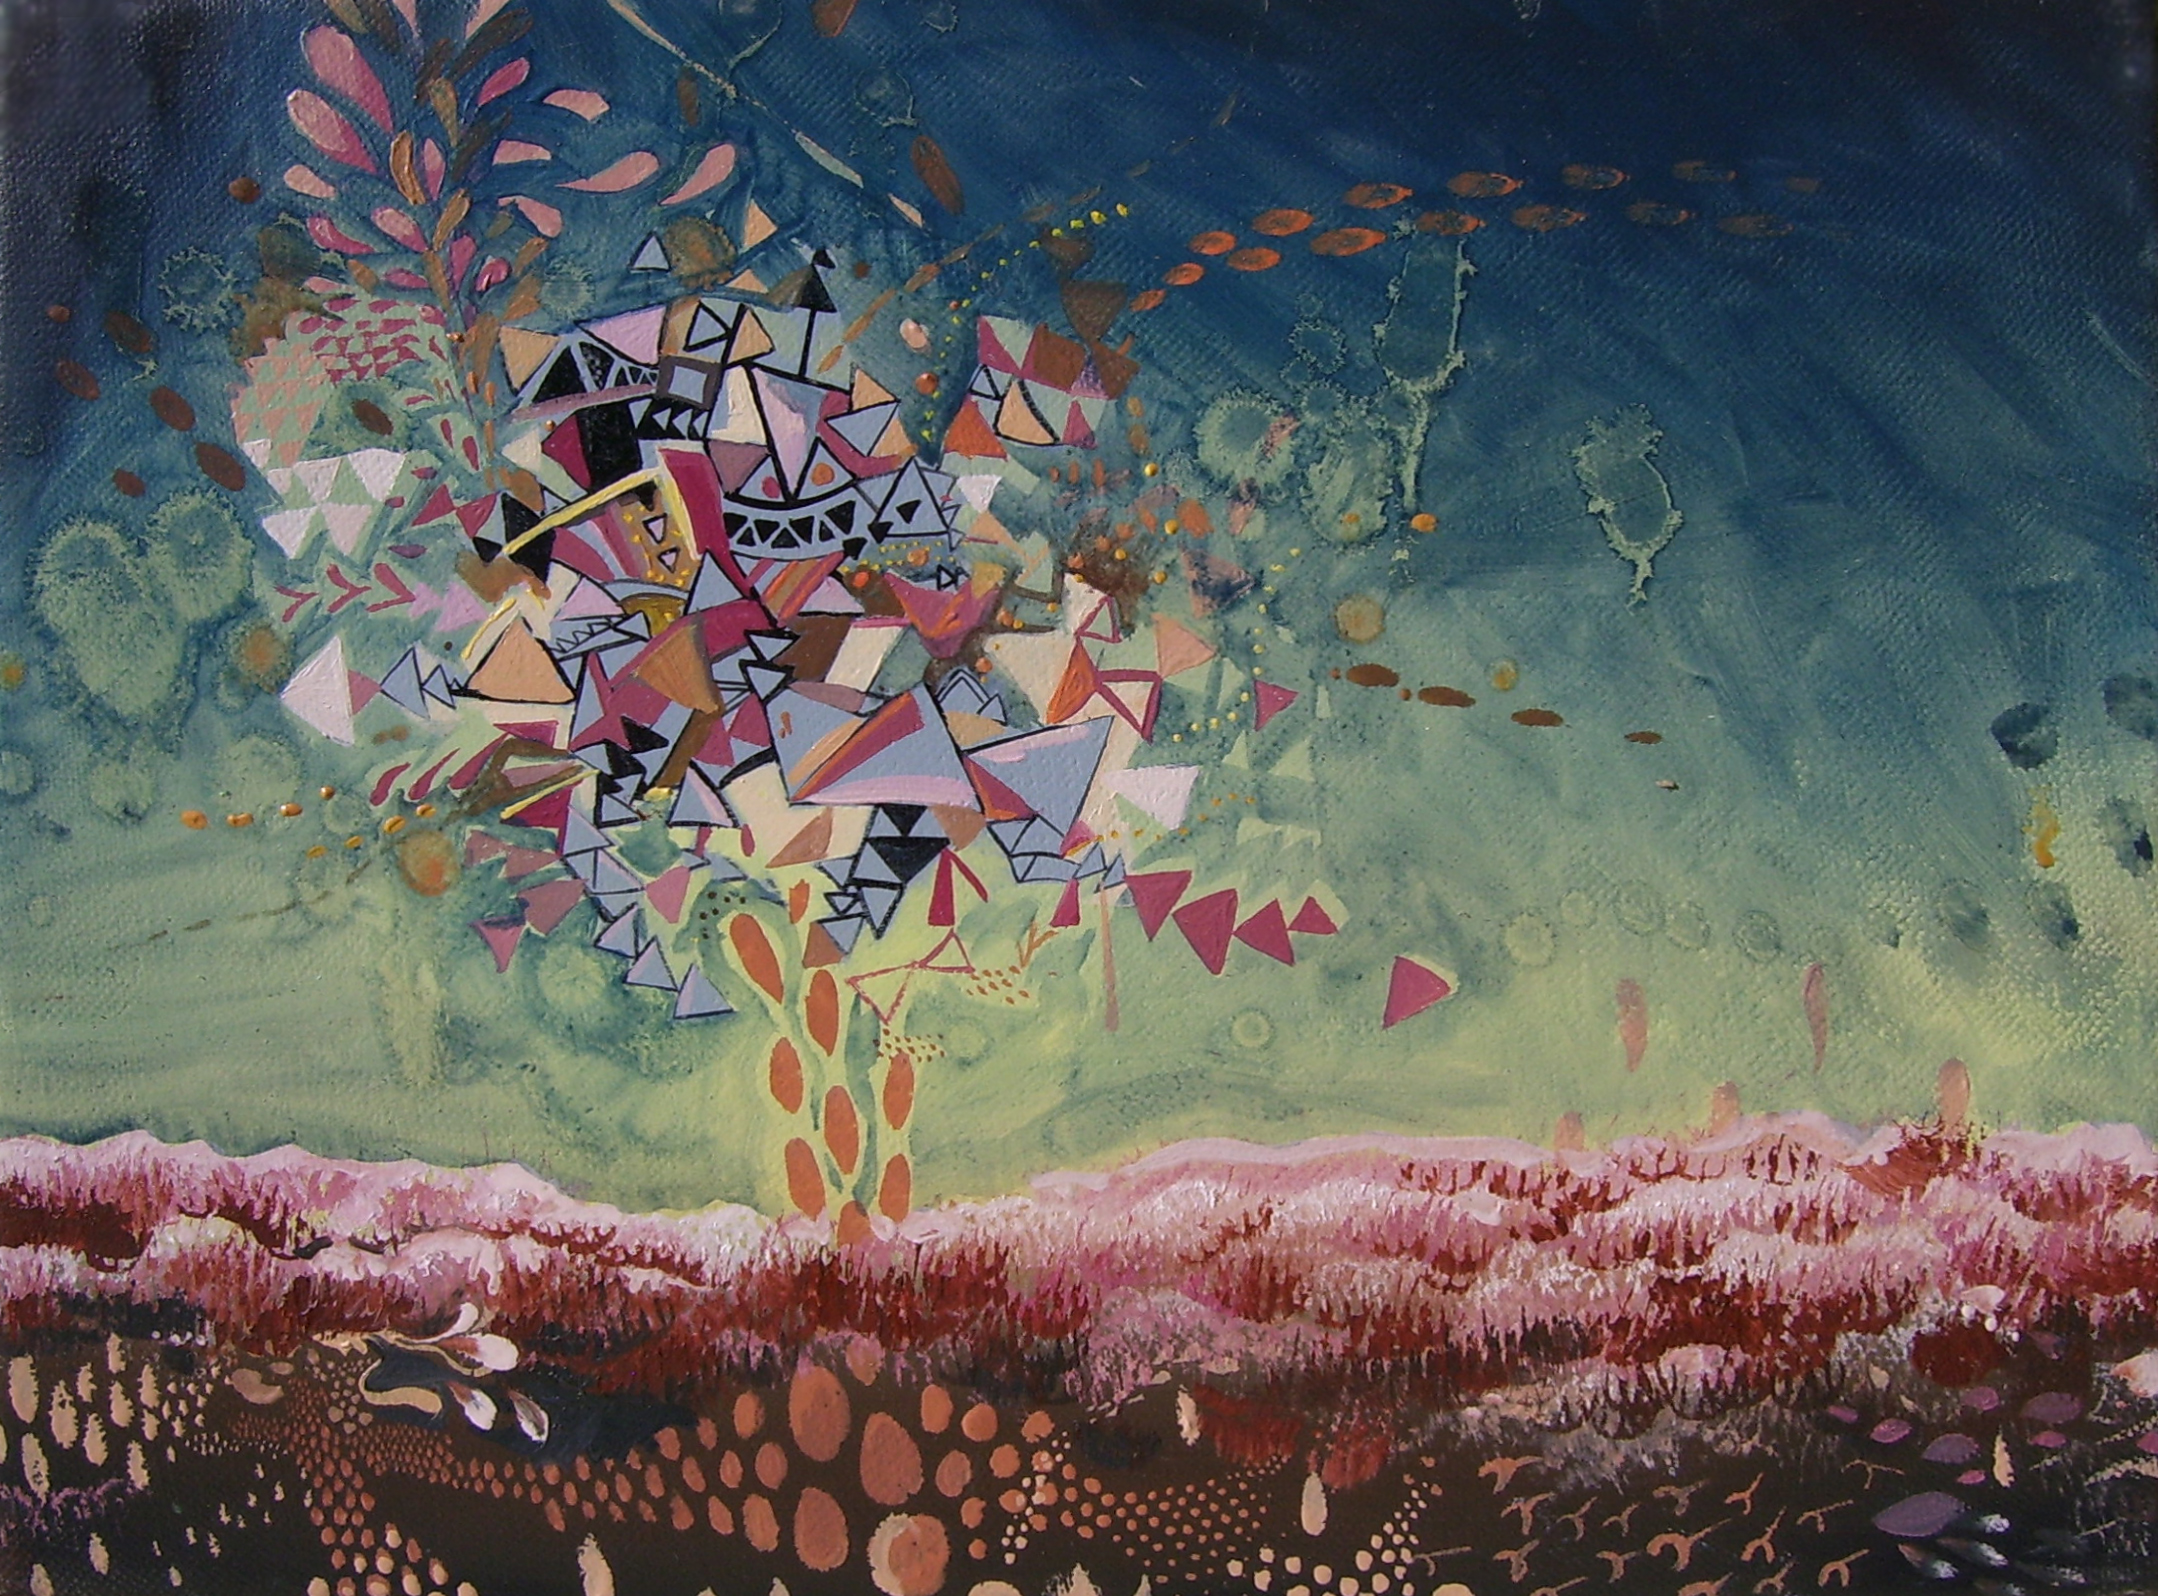  The Hatchery / 2007 / oil on canvas/ 9 x 12 inches   